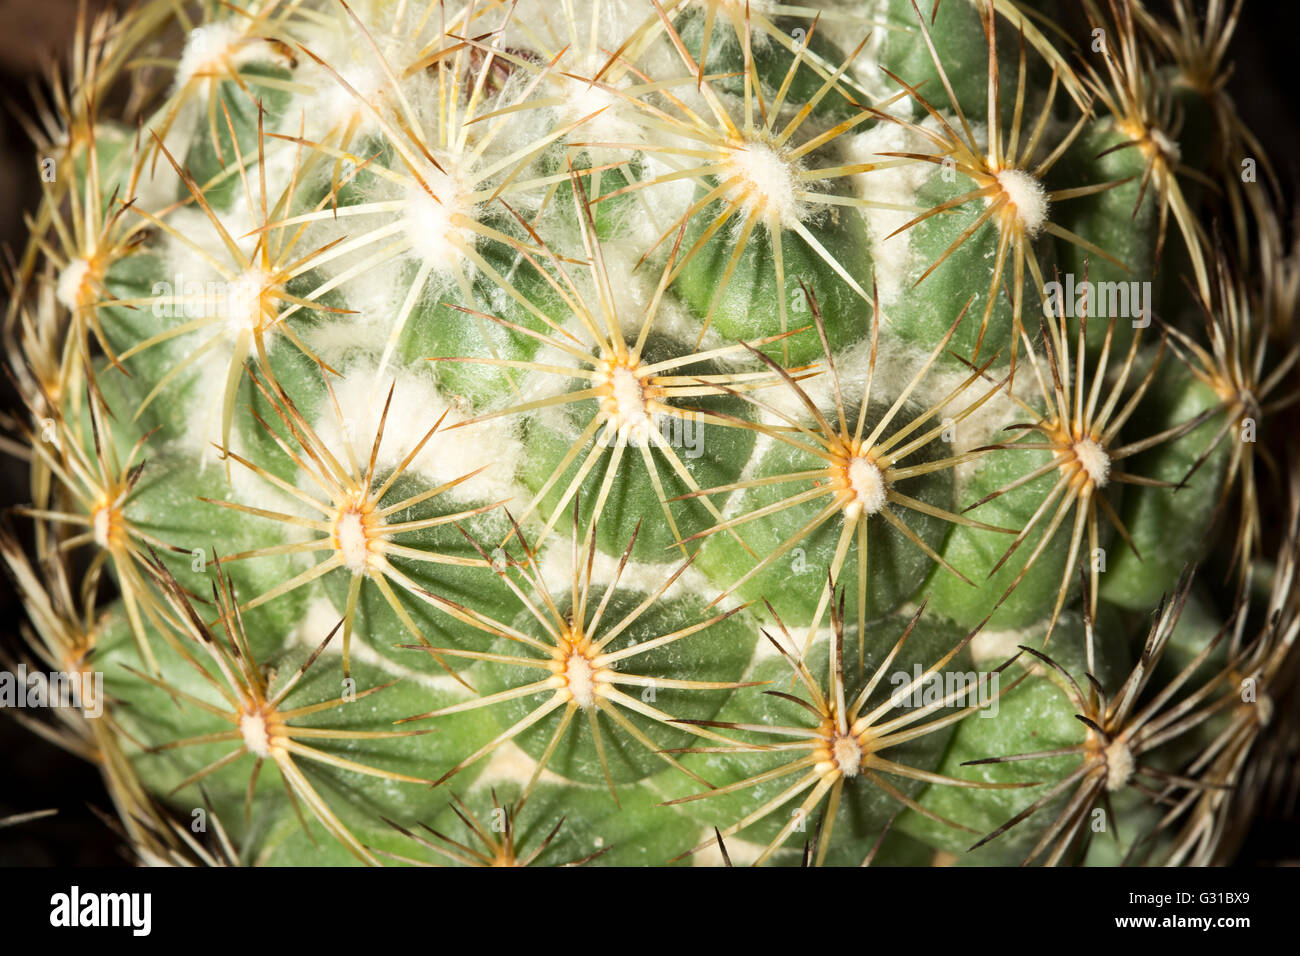 Closeup view of a Coryphantha pallida succulent plant known as beehive cactus Stock Photo